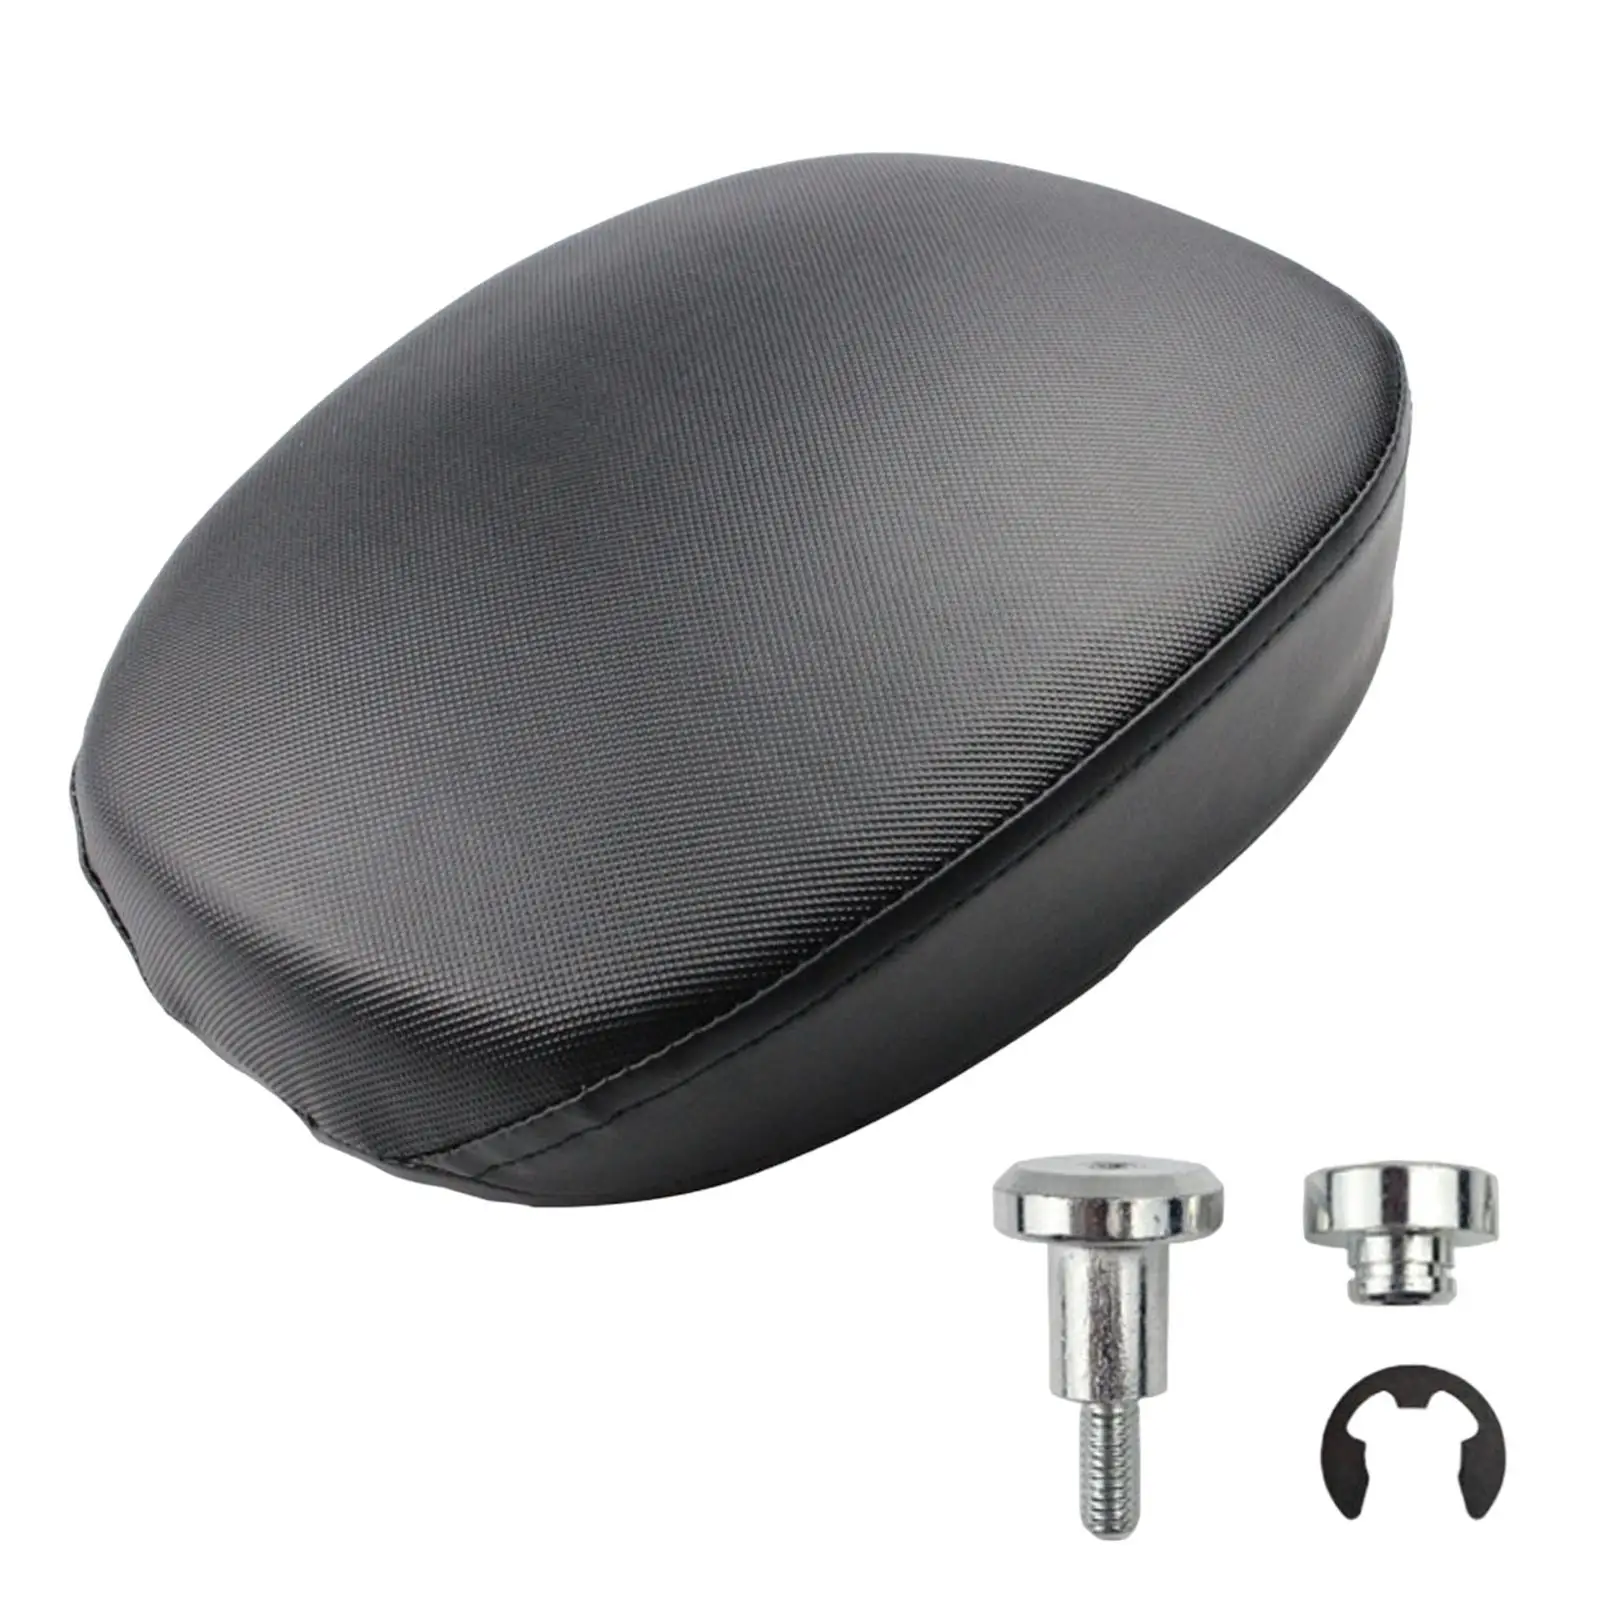 Motorcycle Rear Passenger Seat Pillion Pad for 883 1200 x48 Accessory